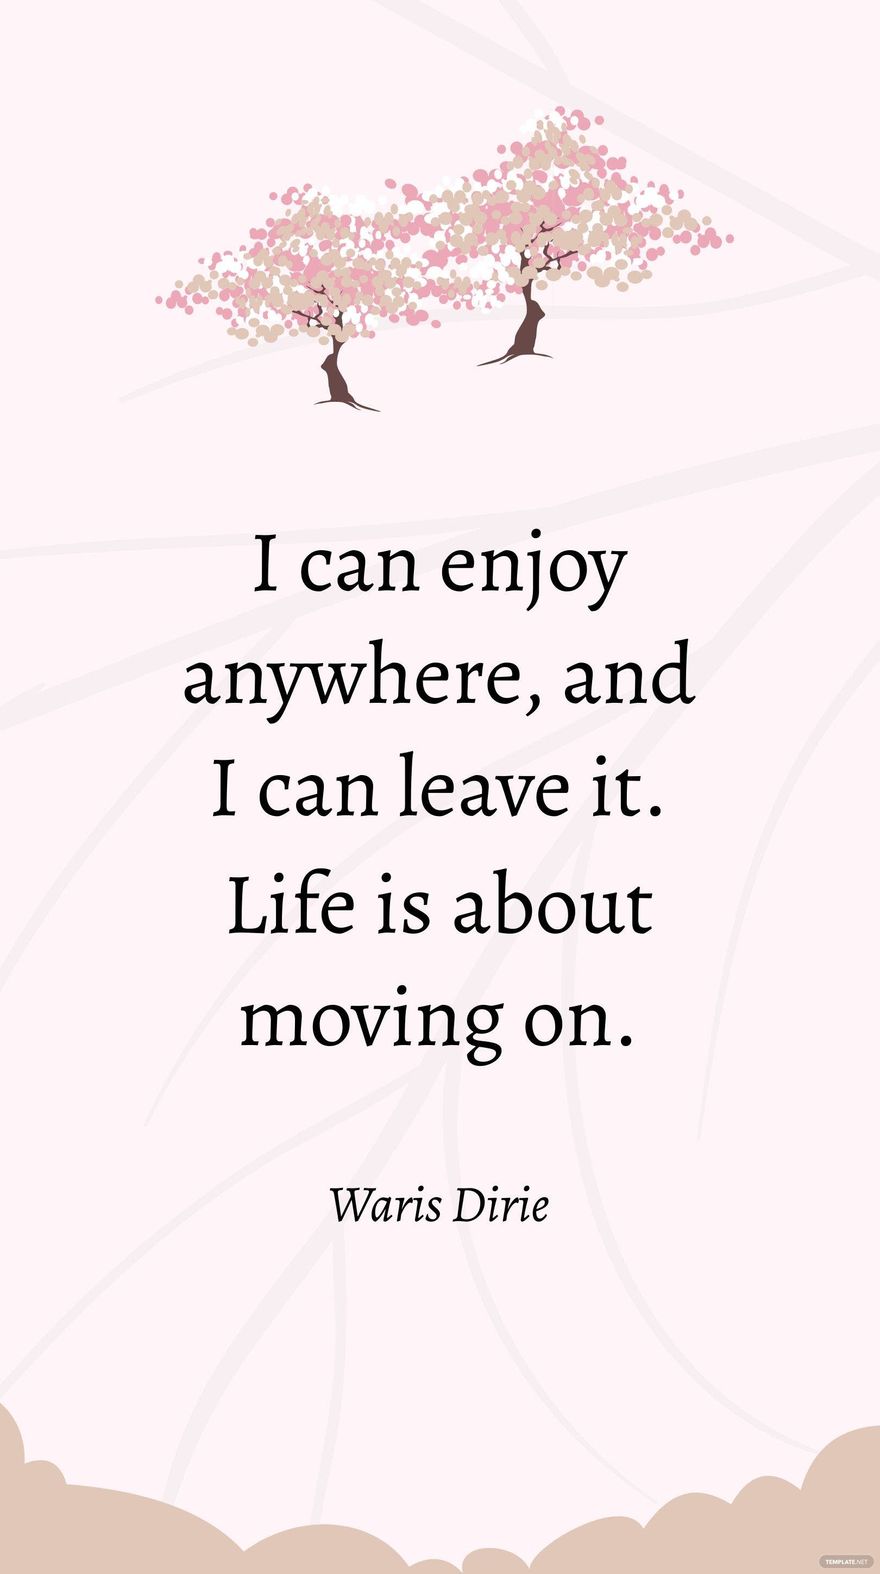 Waris Dirie - I can enjoy anywhere, and I can leave it. Life is about moving on. in JPG